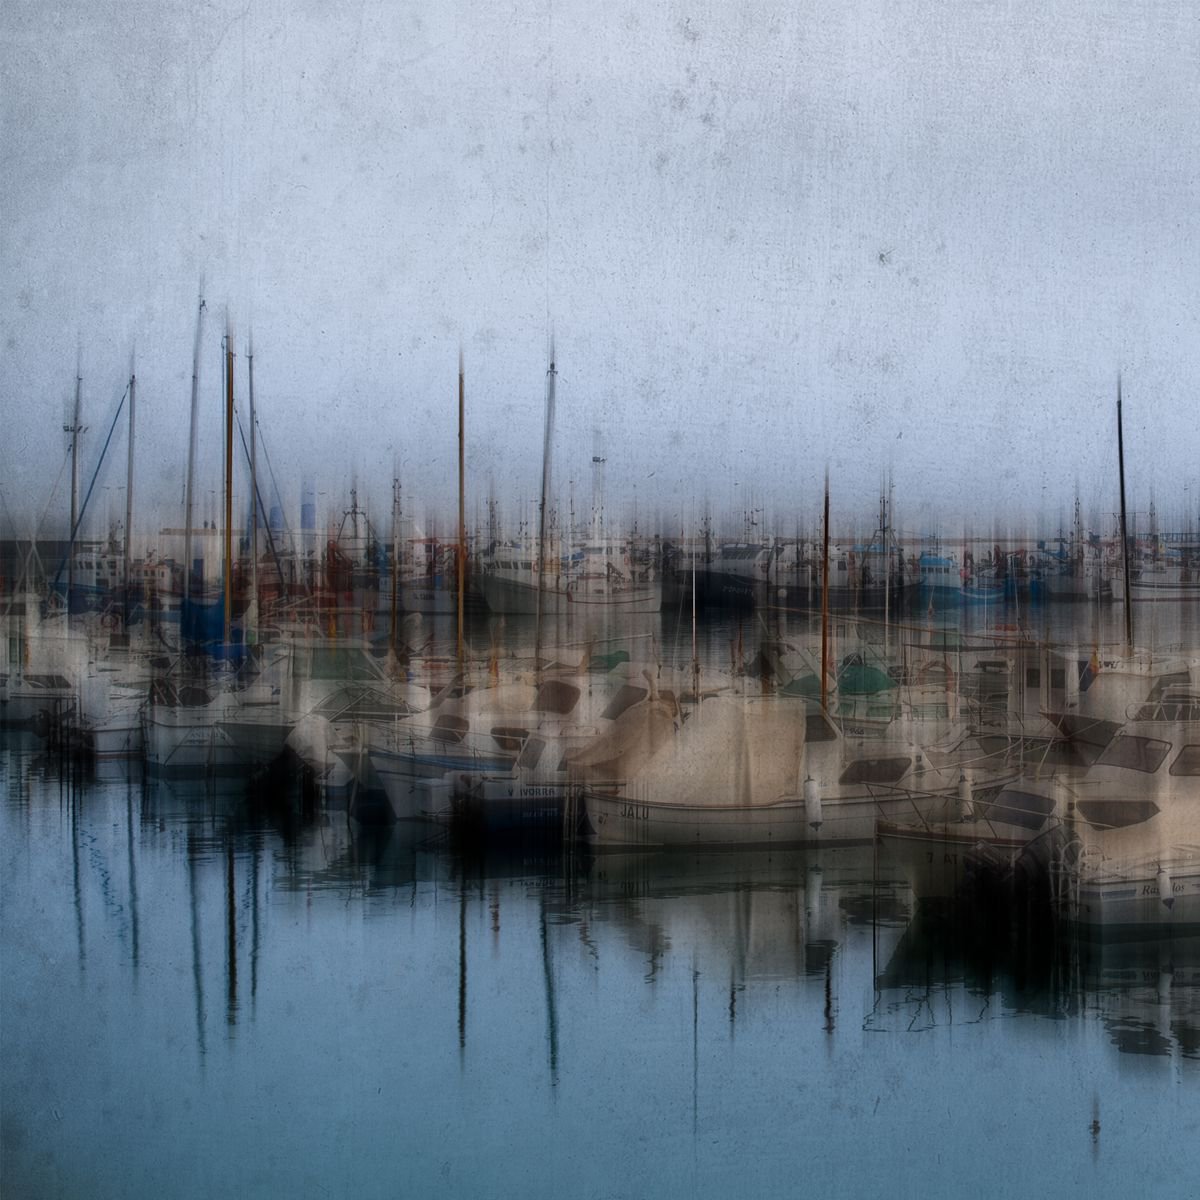 Boating Marina #1 Limited Edition 1/50 10x10 inch Photographic Print. by Graham Briggs